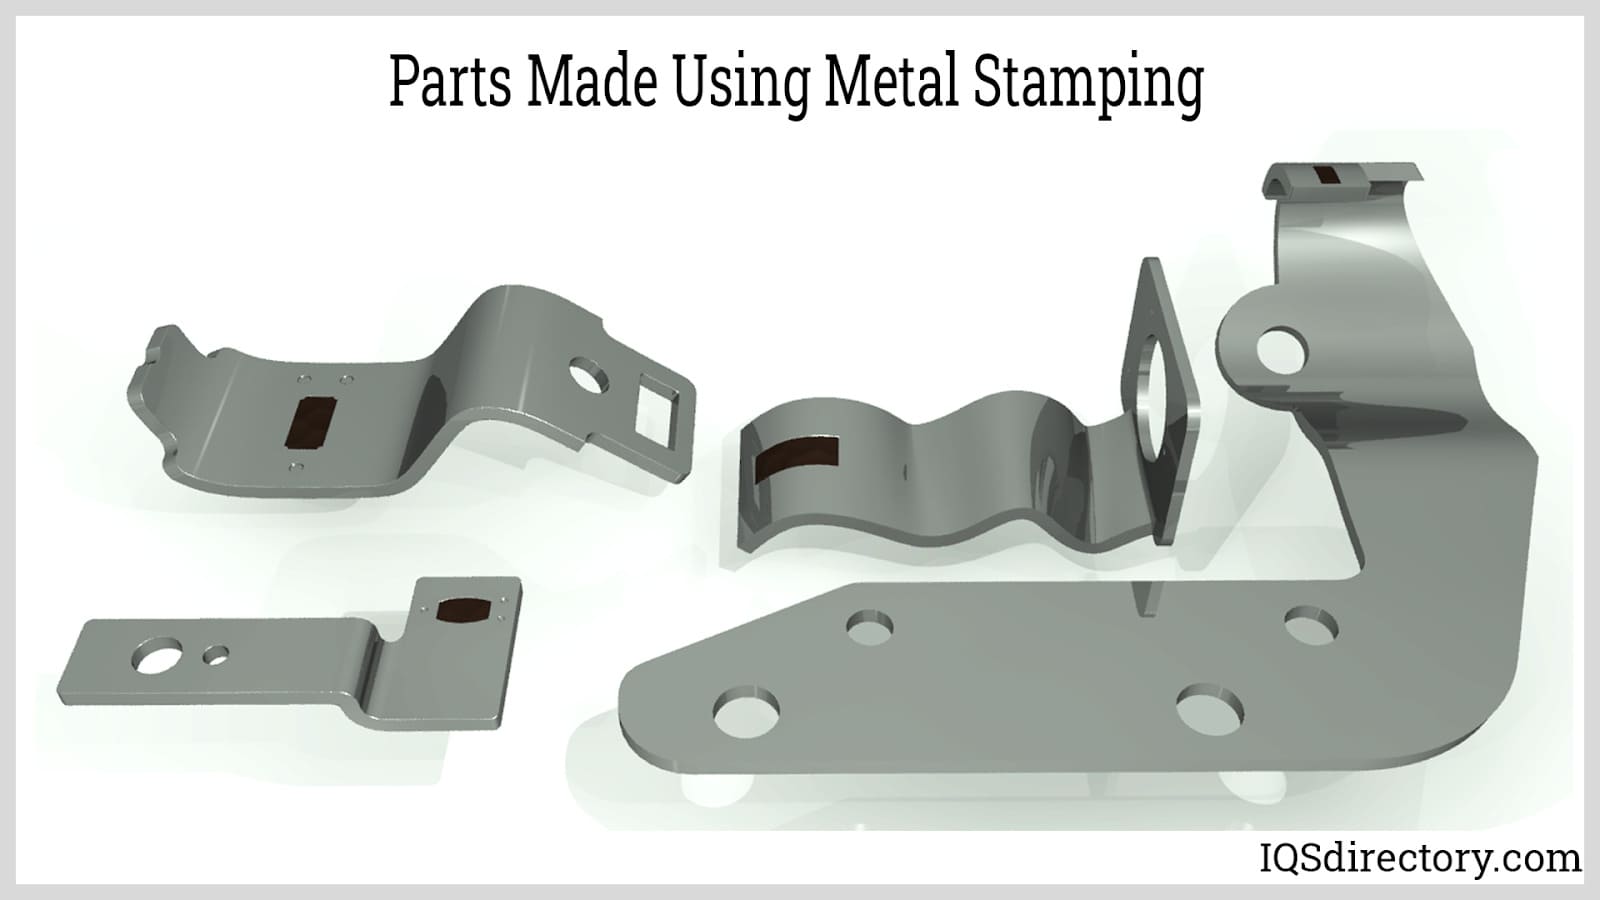 Top 5 Metal Stamping Tools - The Bench